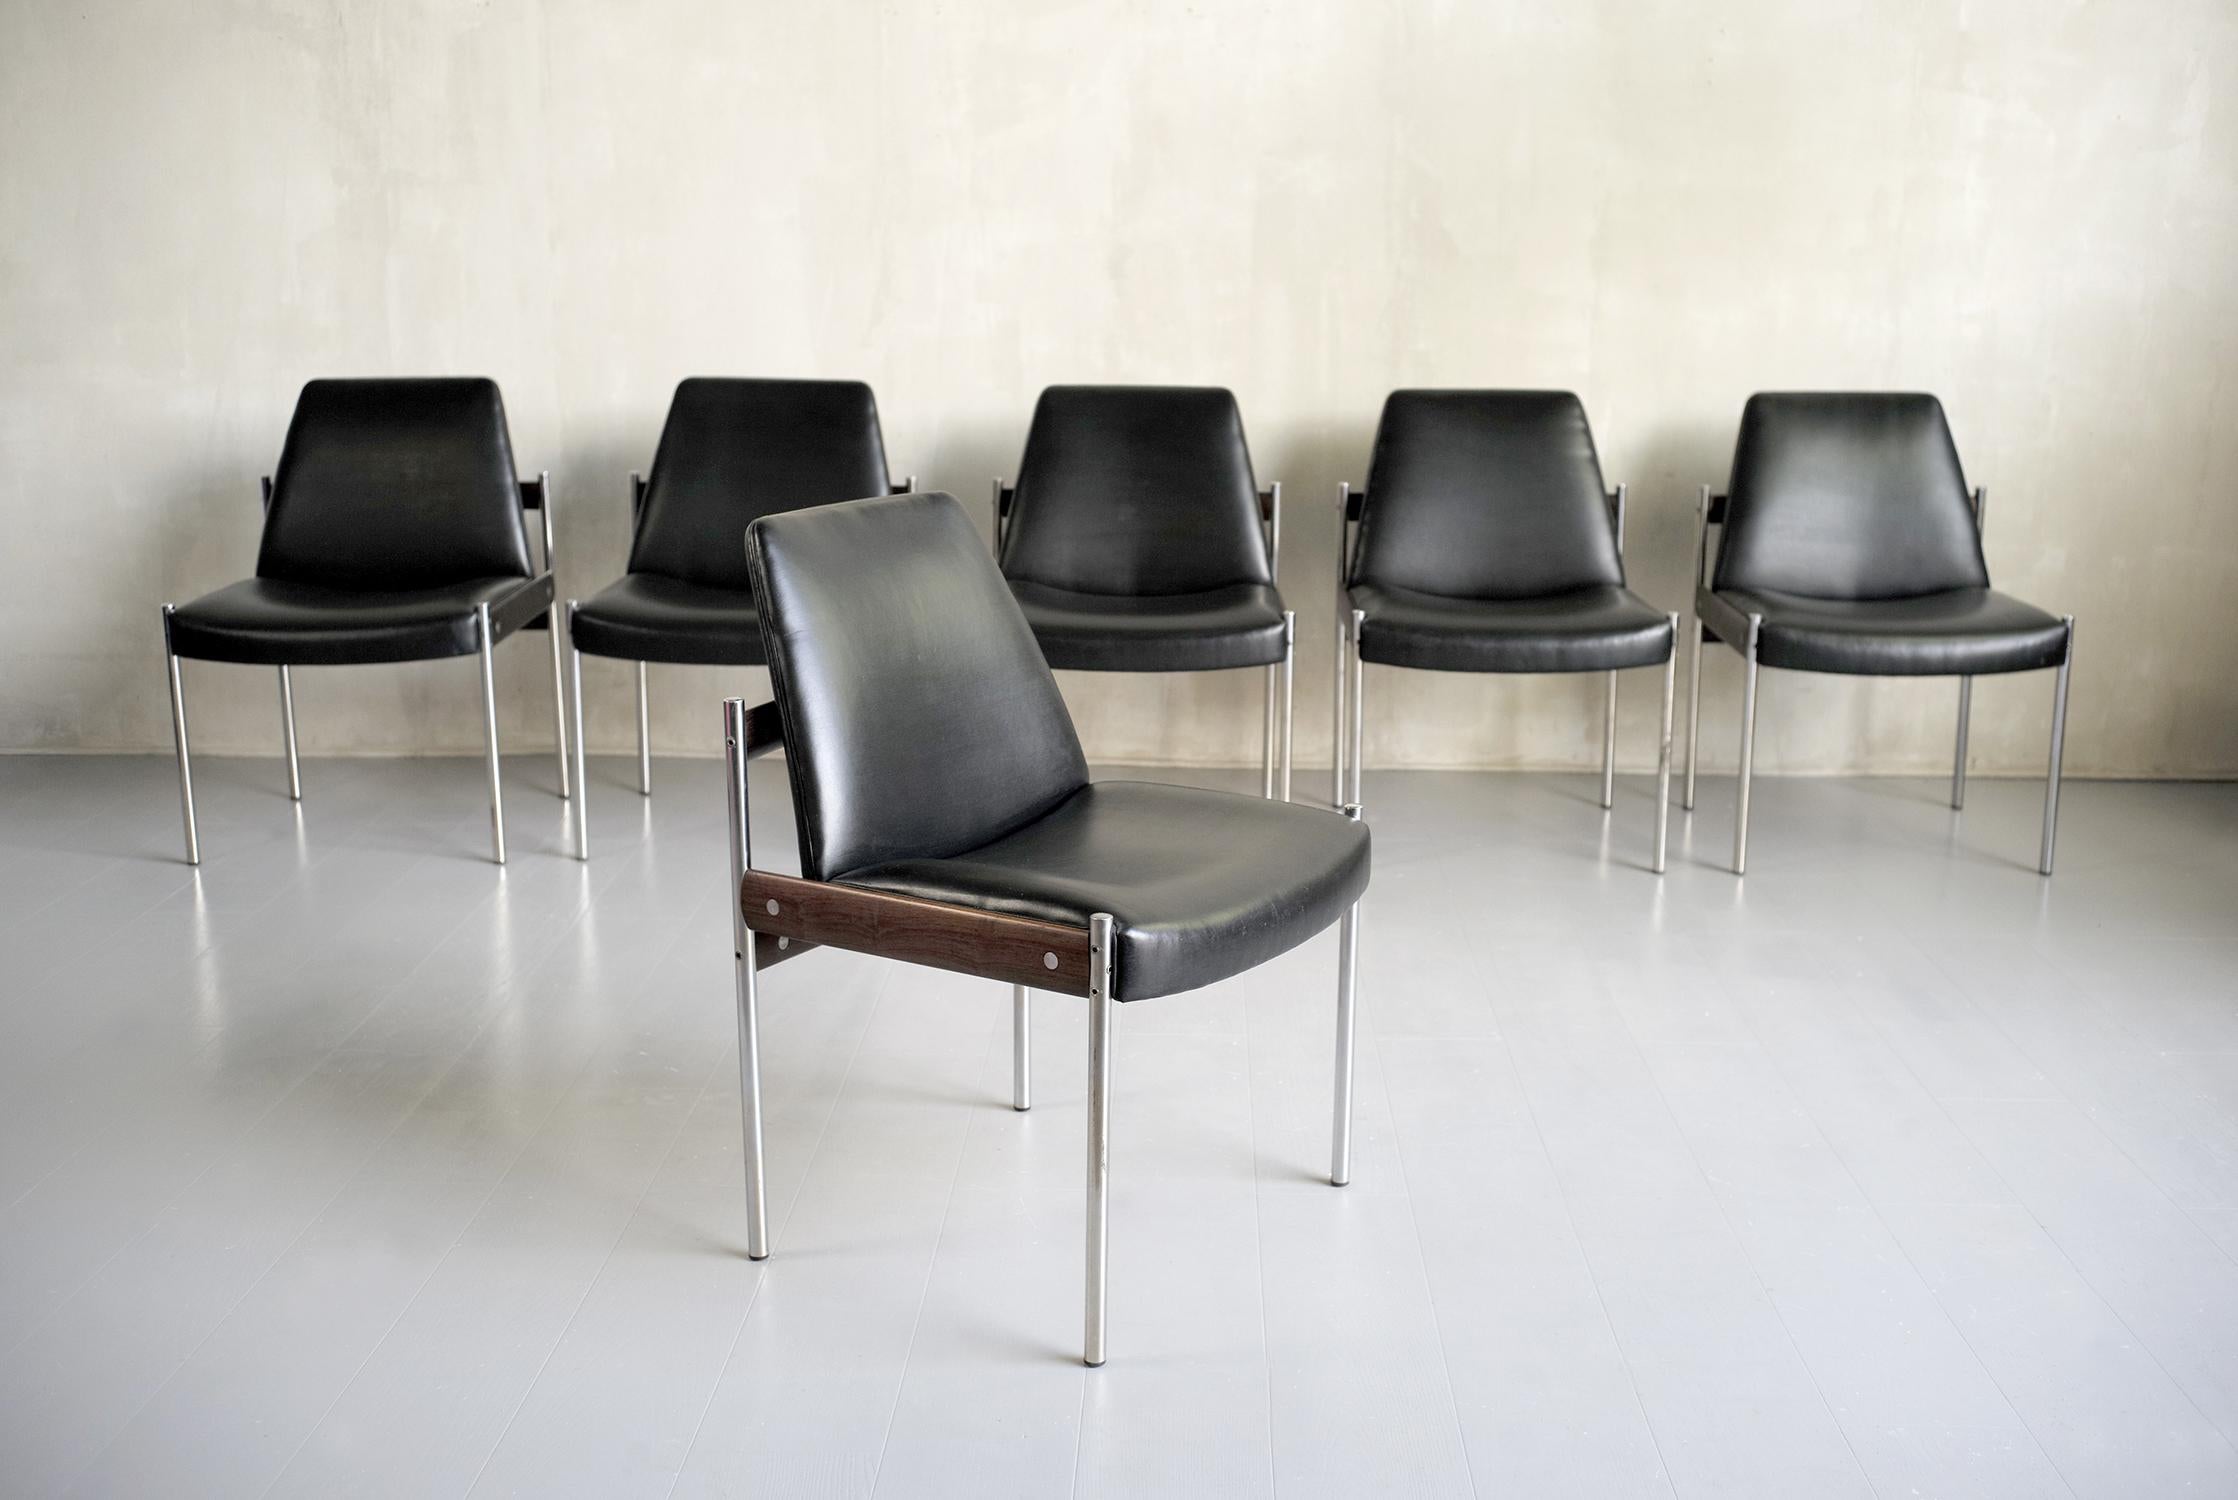 Series of 6 black leather and rosewood chairs by Sven Ivar Dysthe for Dokka Mobler, Norway 1960. Referenced under the number 3001, these chairs won the 1961 International Design Award. (archive document, Wuppertal Town Hall, 1961). Comfortable,